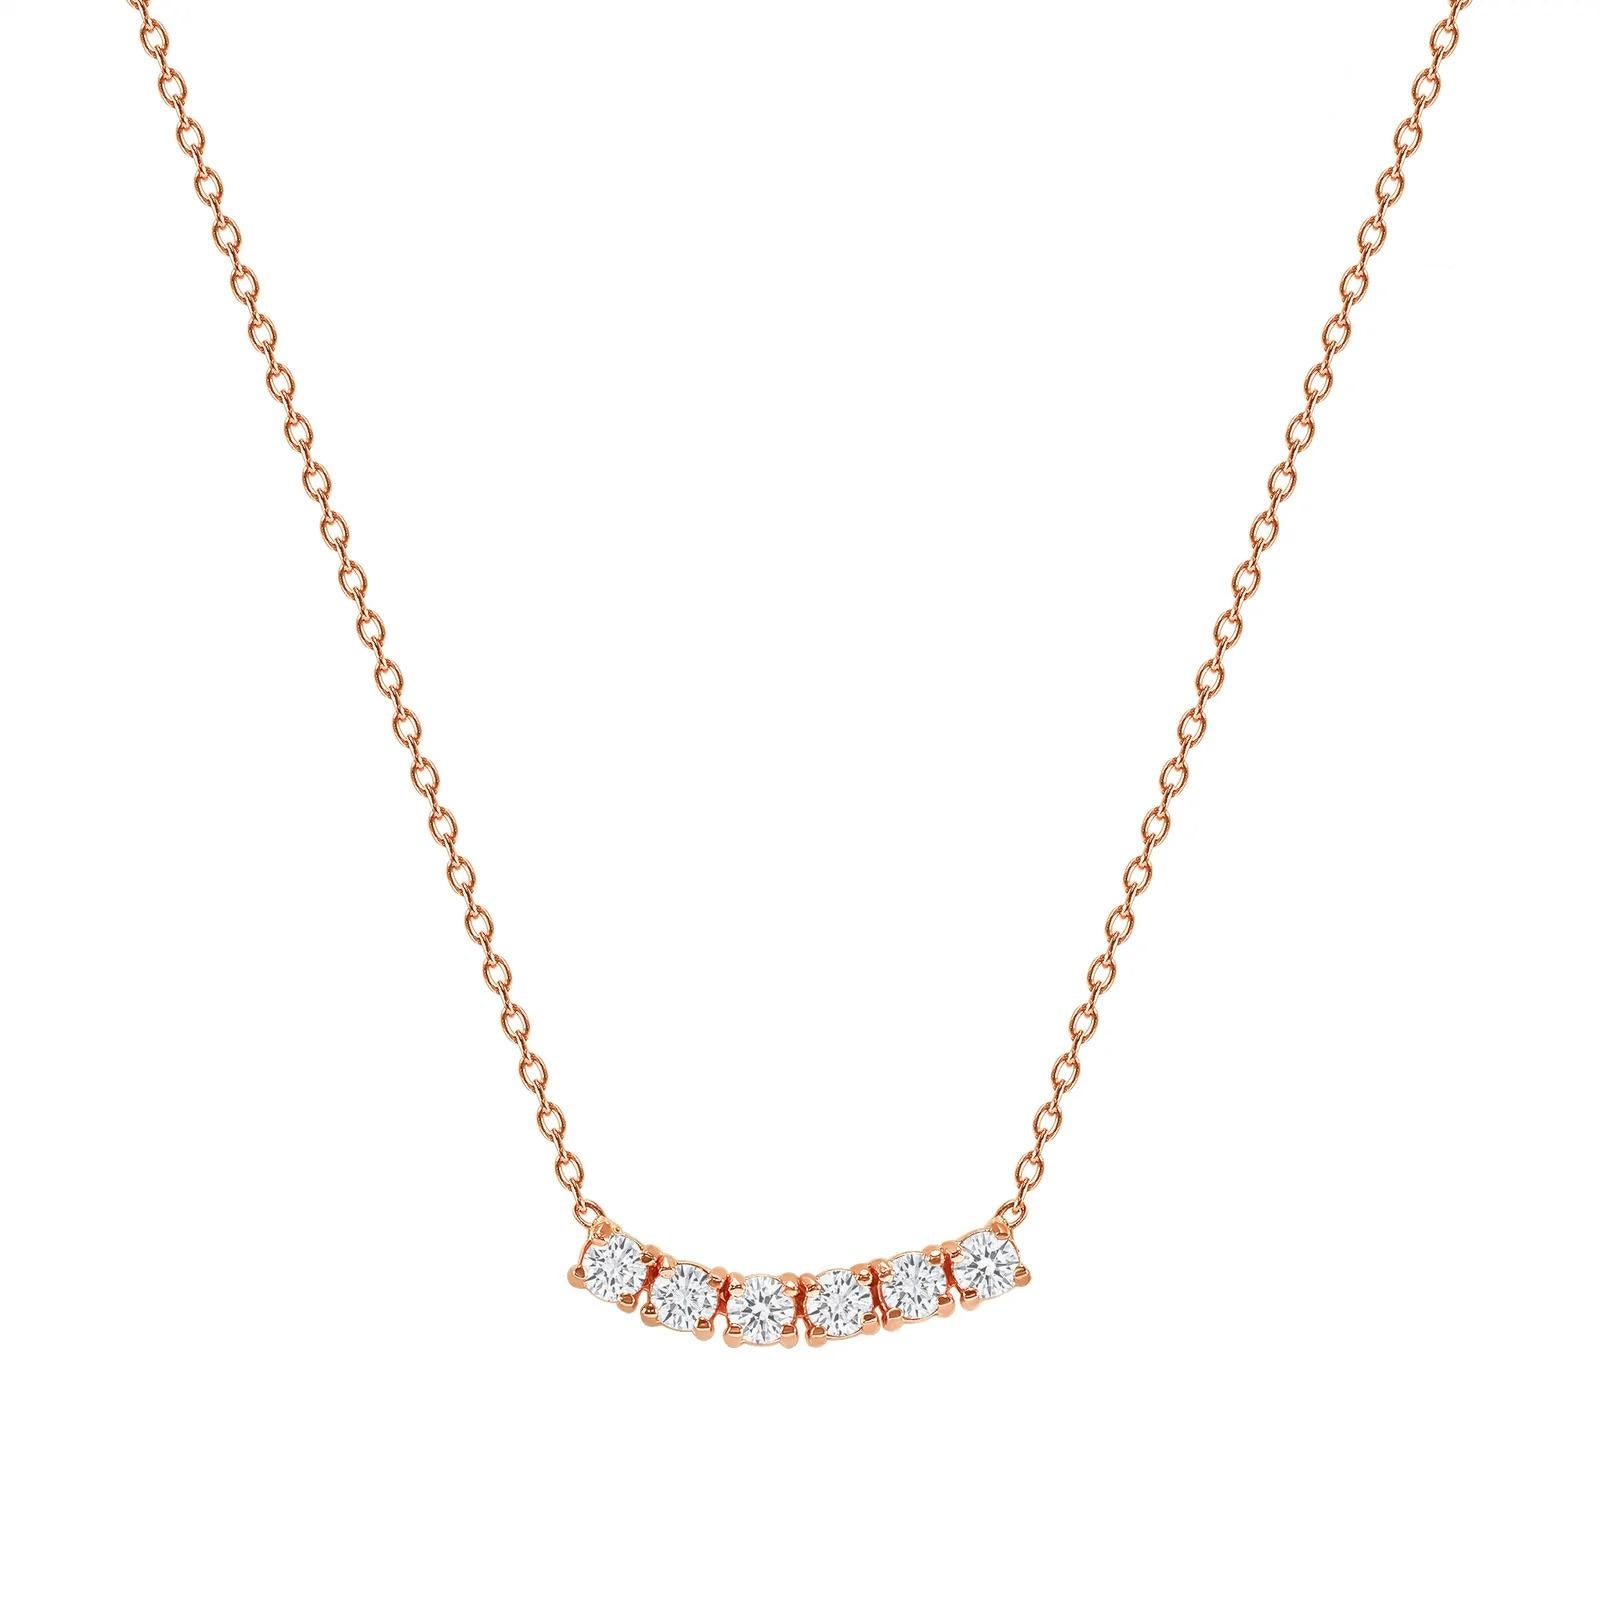 This petite, curved diamond necklace is crafted with gorgeous 14k gold set with six round diamonds.  

Gold: 14k 
Diamond Total Carats: 0.50 ct
Diamond Cut: Round (6 diamonds)
Diamond Clarity: VS
Diamond Color: F
Color: Rose Gold
Necklace Length: 18